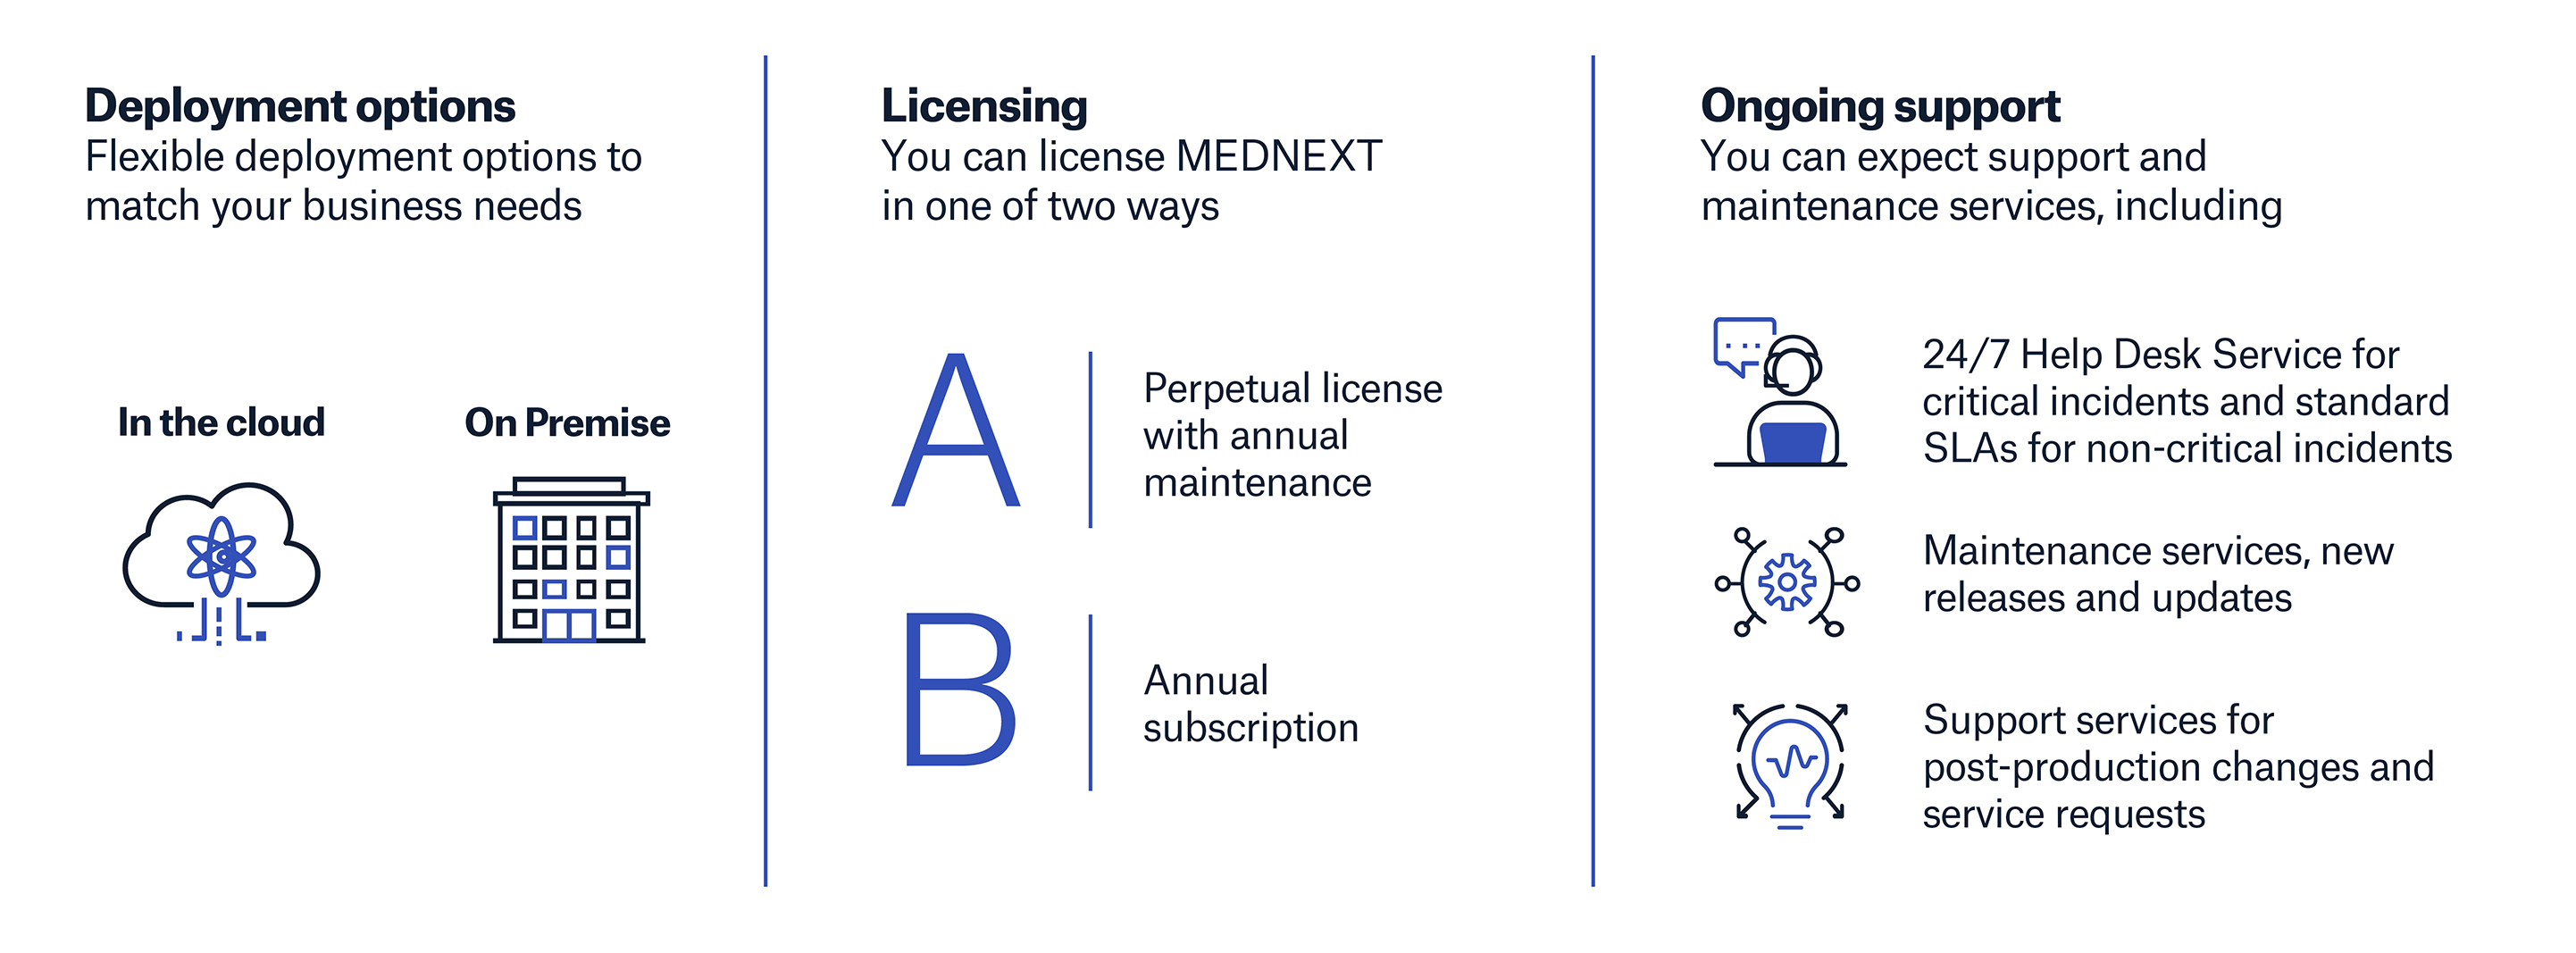 Deployment and licensing options that work best for your business